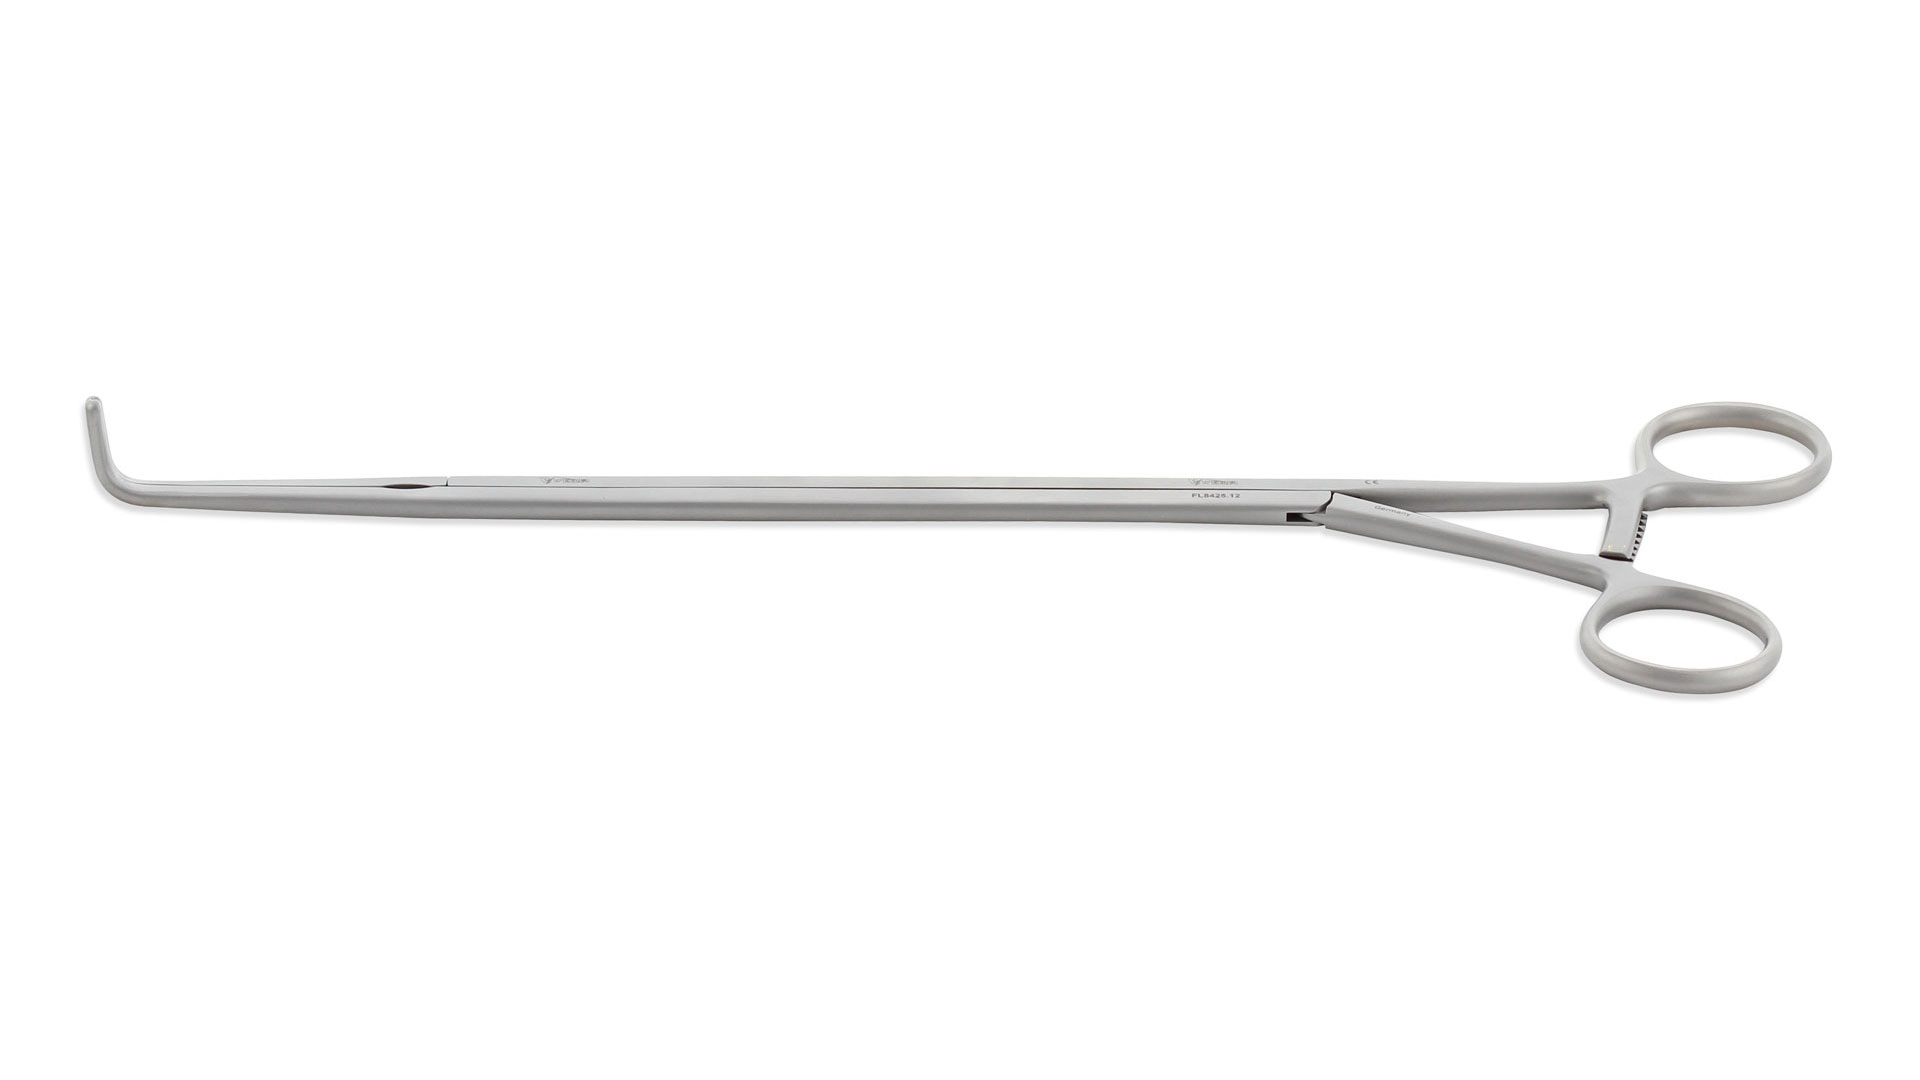 VATS Right Angle Dissector – DeBakey/Cooley serrated jaws